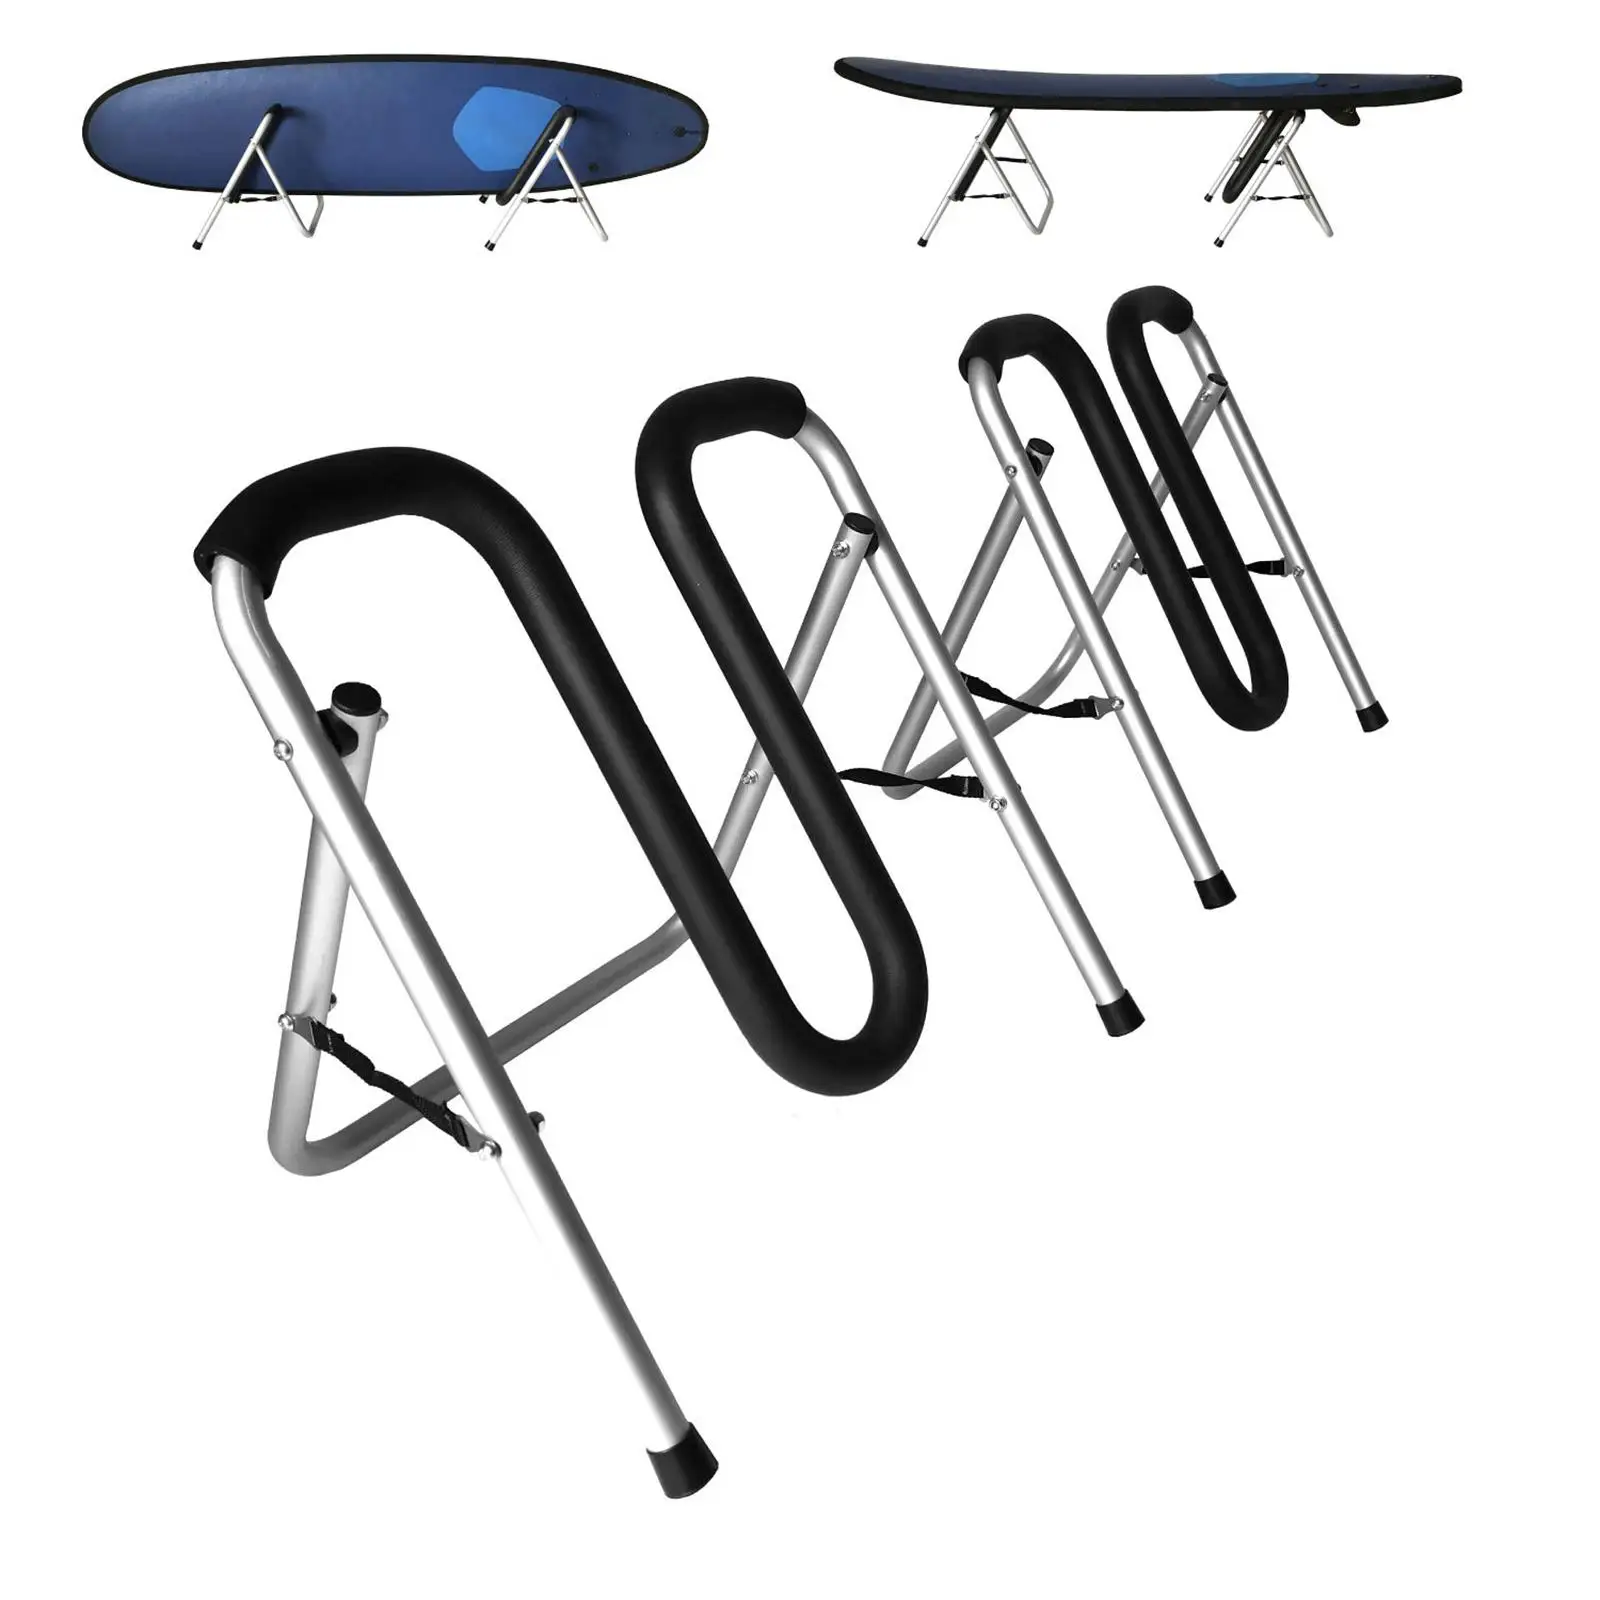 Foldable Surfboard Rack, Surfboard Storage Holder with Foam Protector, Surfboard Stand